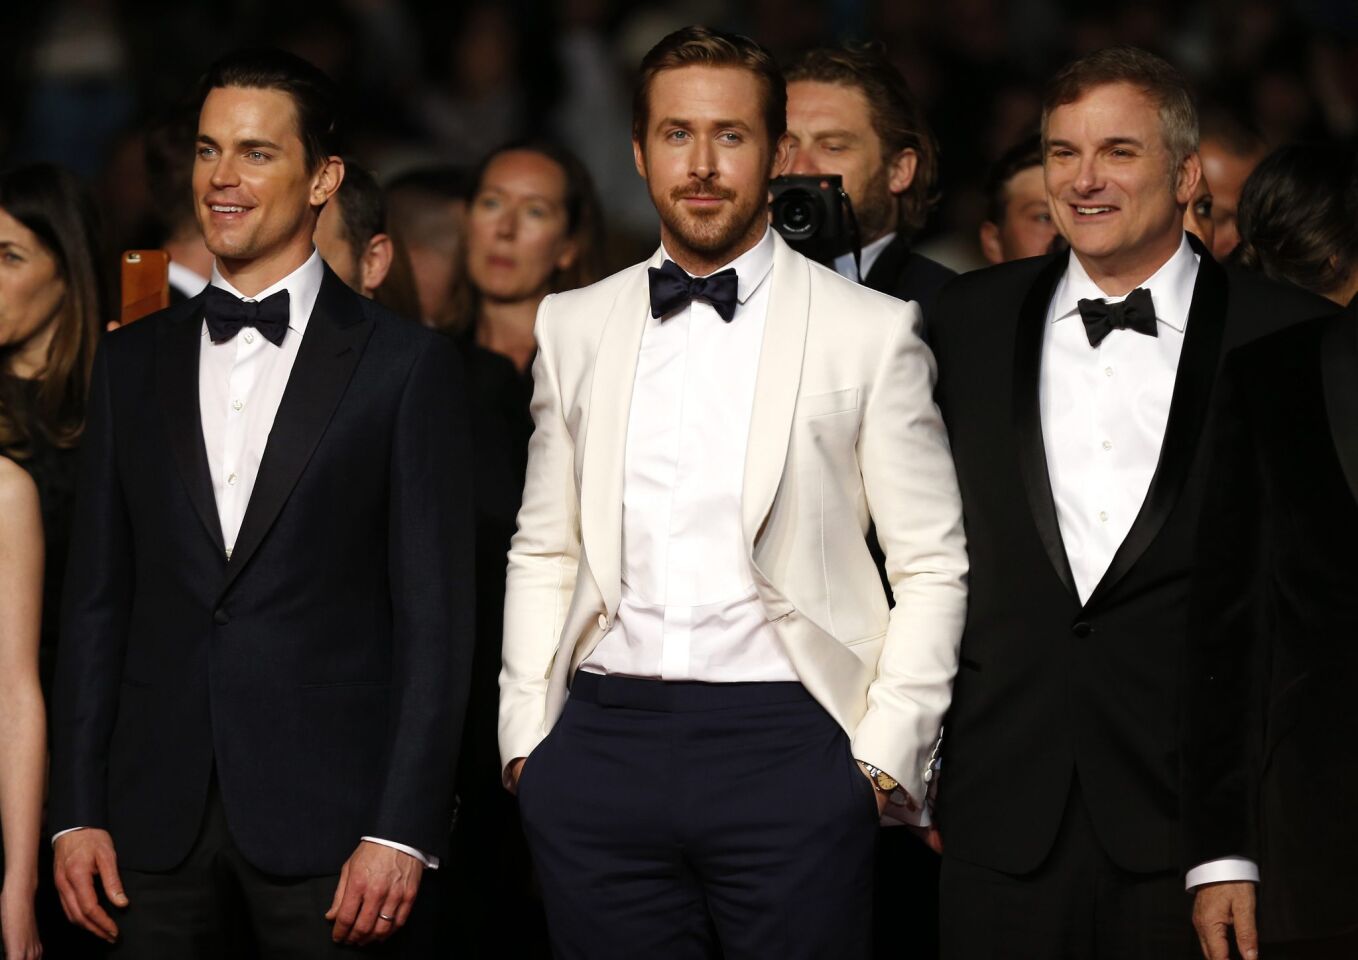 'The Nice Guys' premiere in Cannes